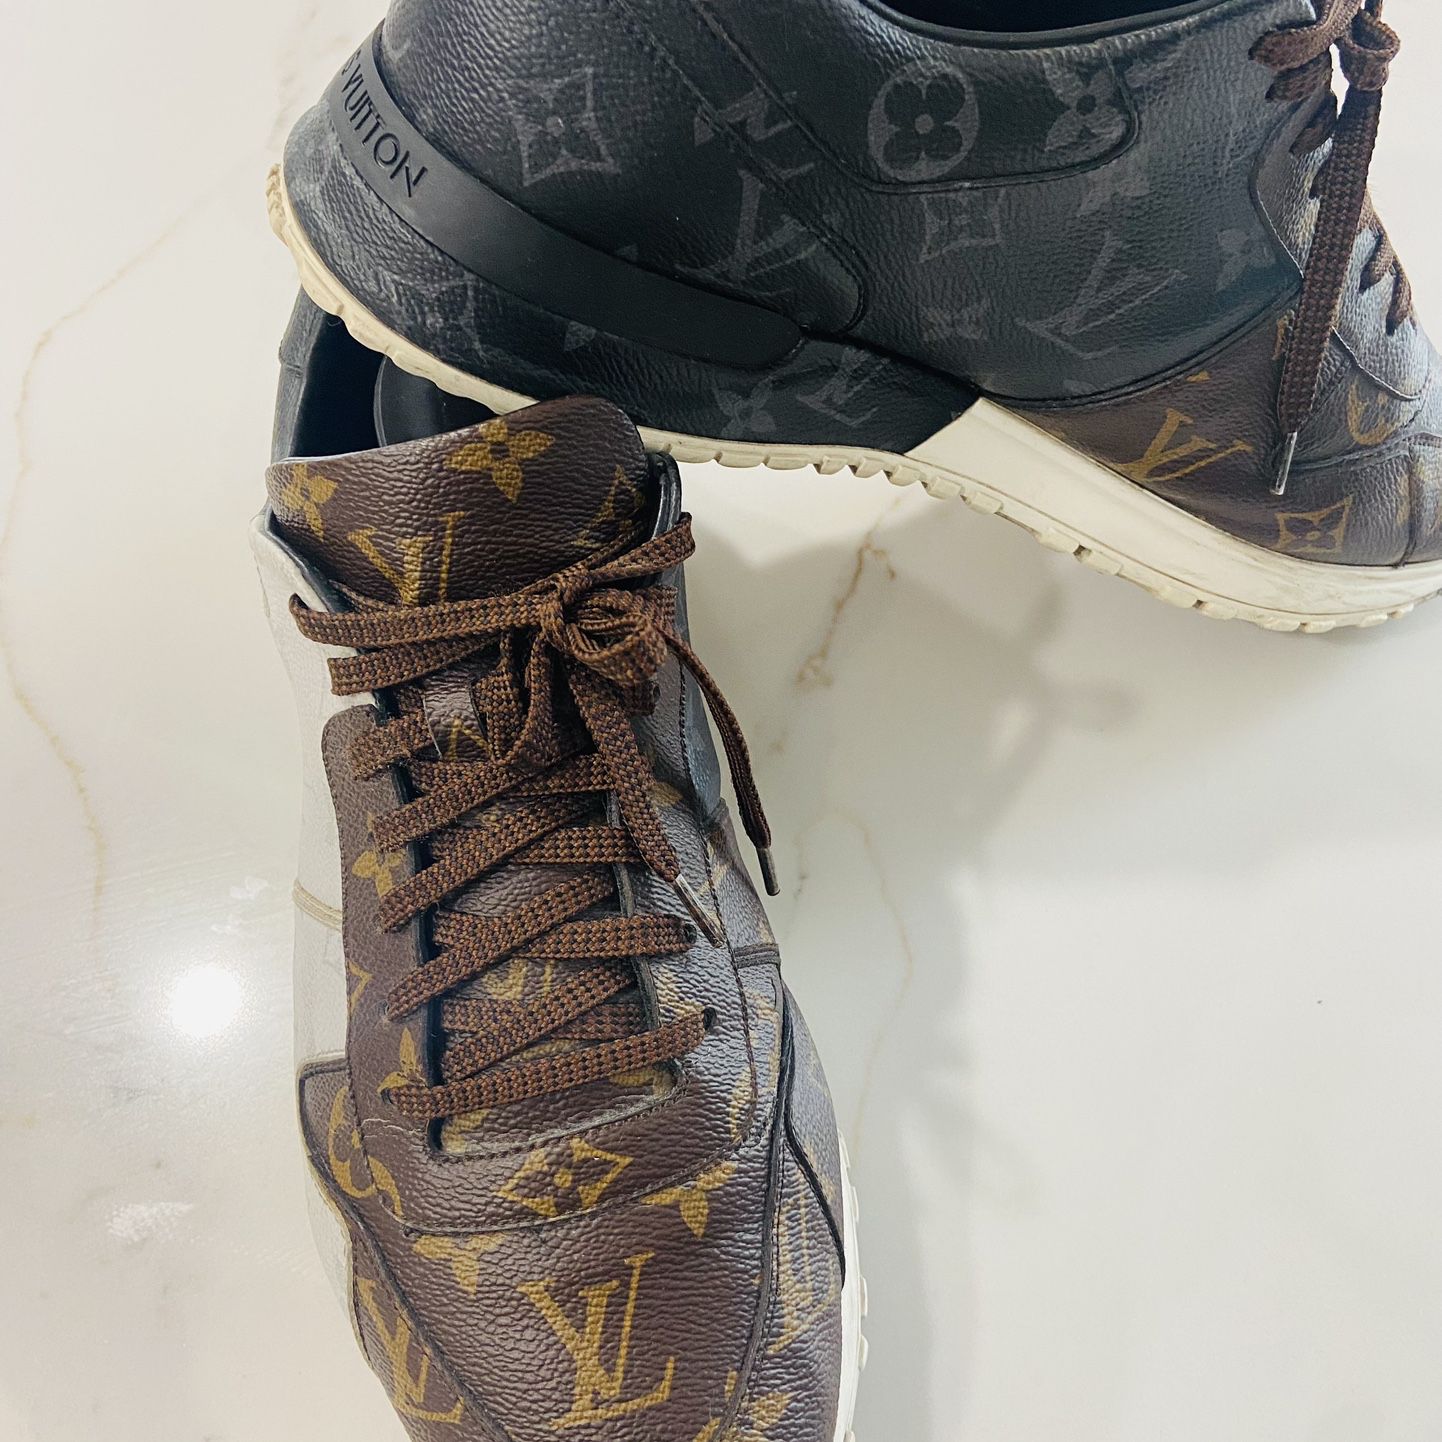 Louie Vuitton Run Away Sneakers for Sale in Orlando, FL - OfferUp